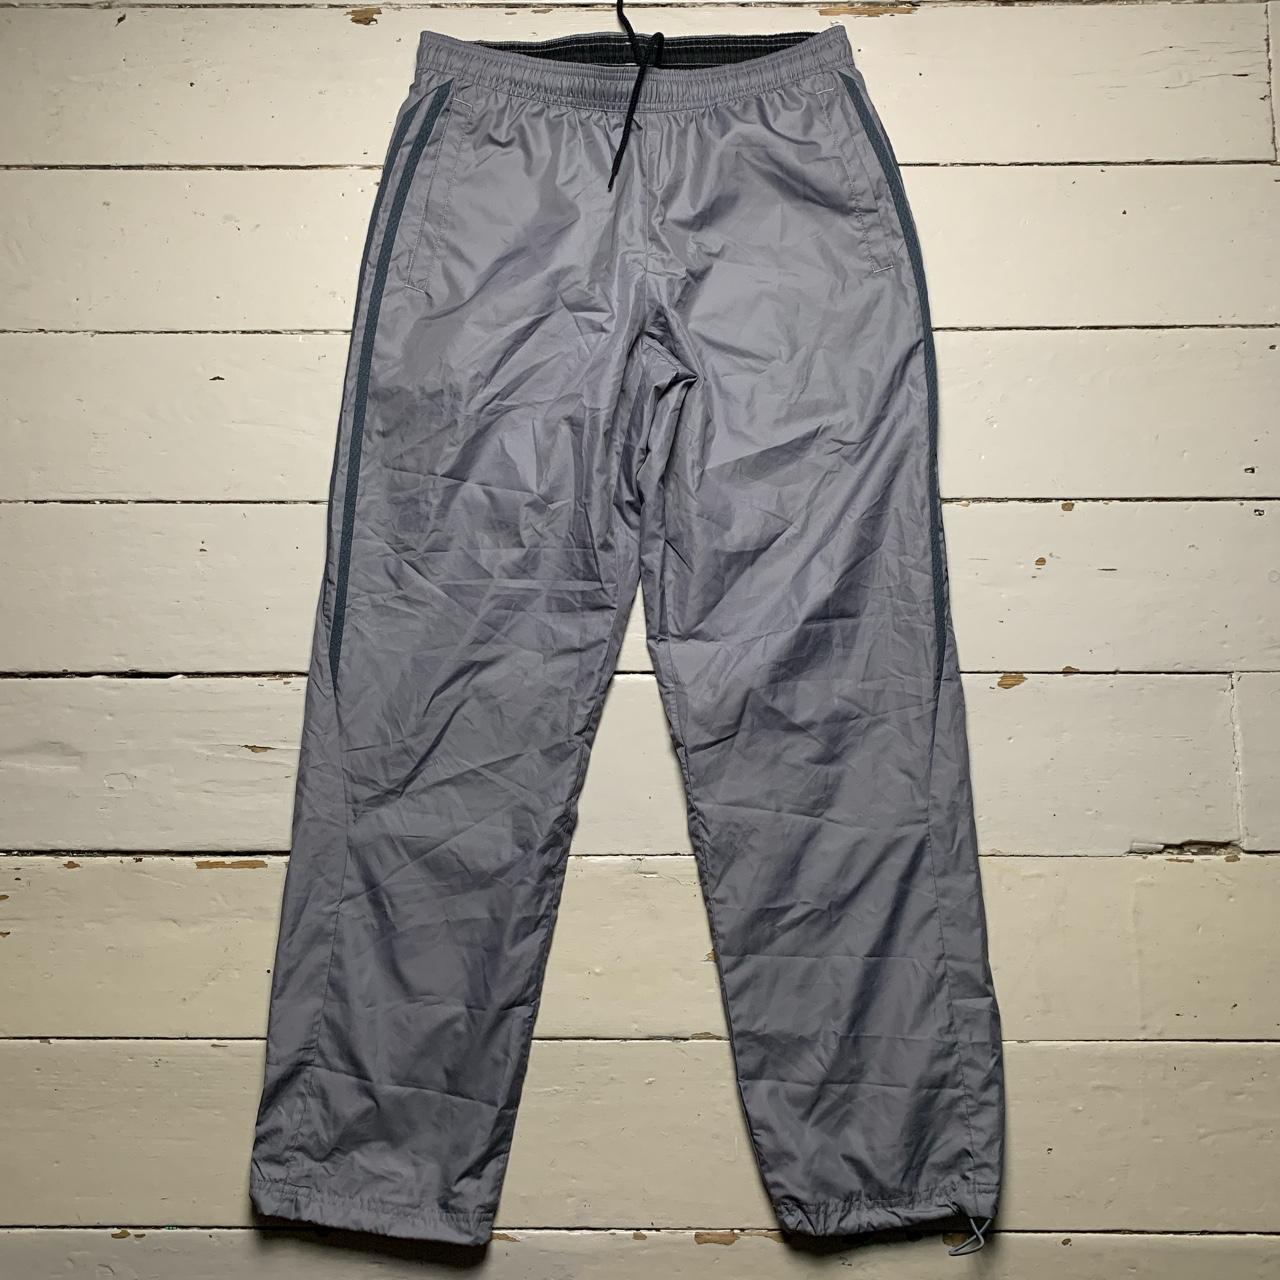 Adidas Baggy Shell Track Pant Bottoms Grey and Silver